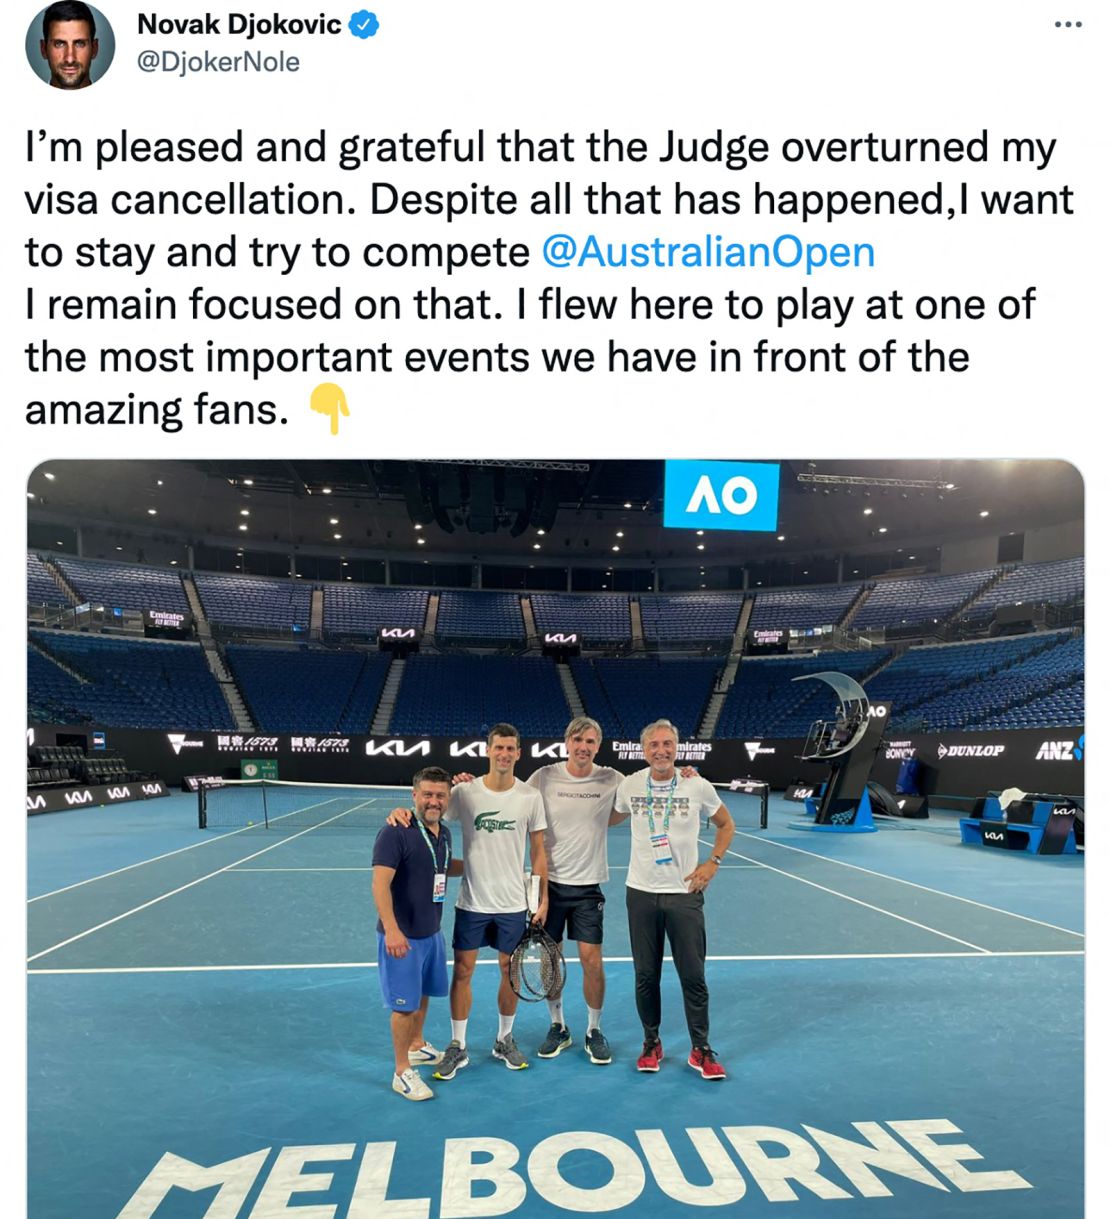 A screen grab shows a Twitter post by Djokovic after he won a court challenge to remain in Australia, in Melbourne, uploaded on January 11, 2022.